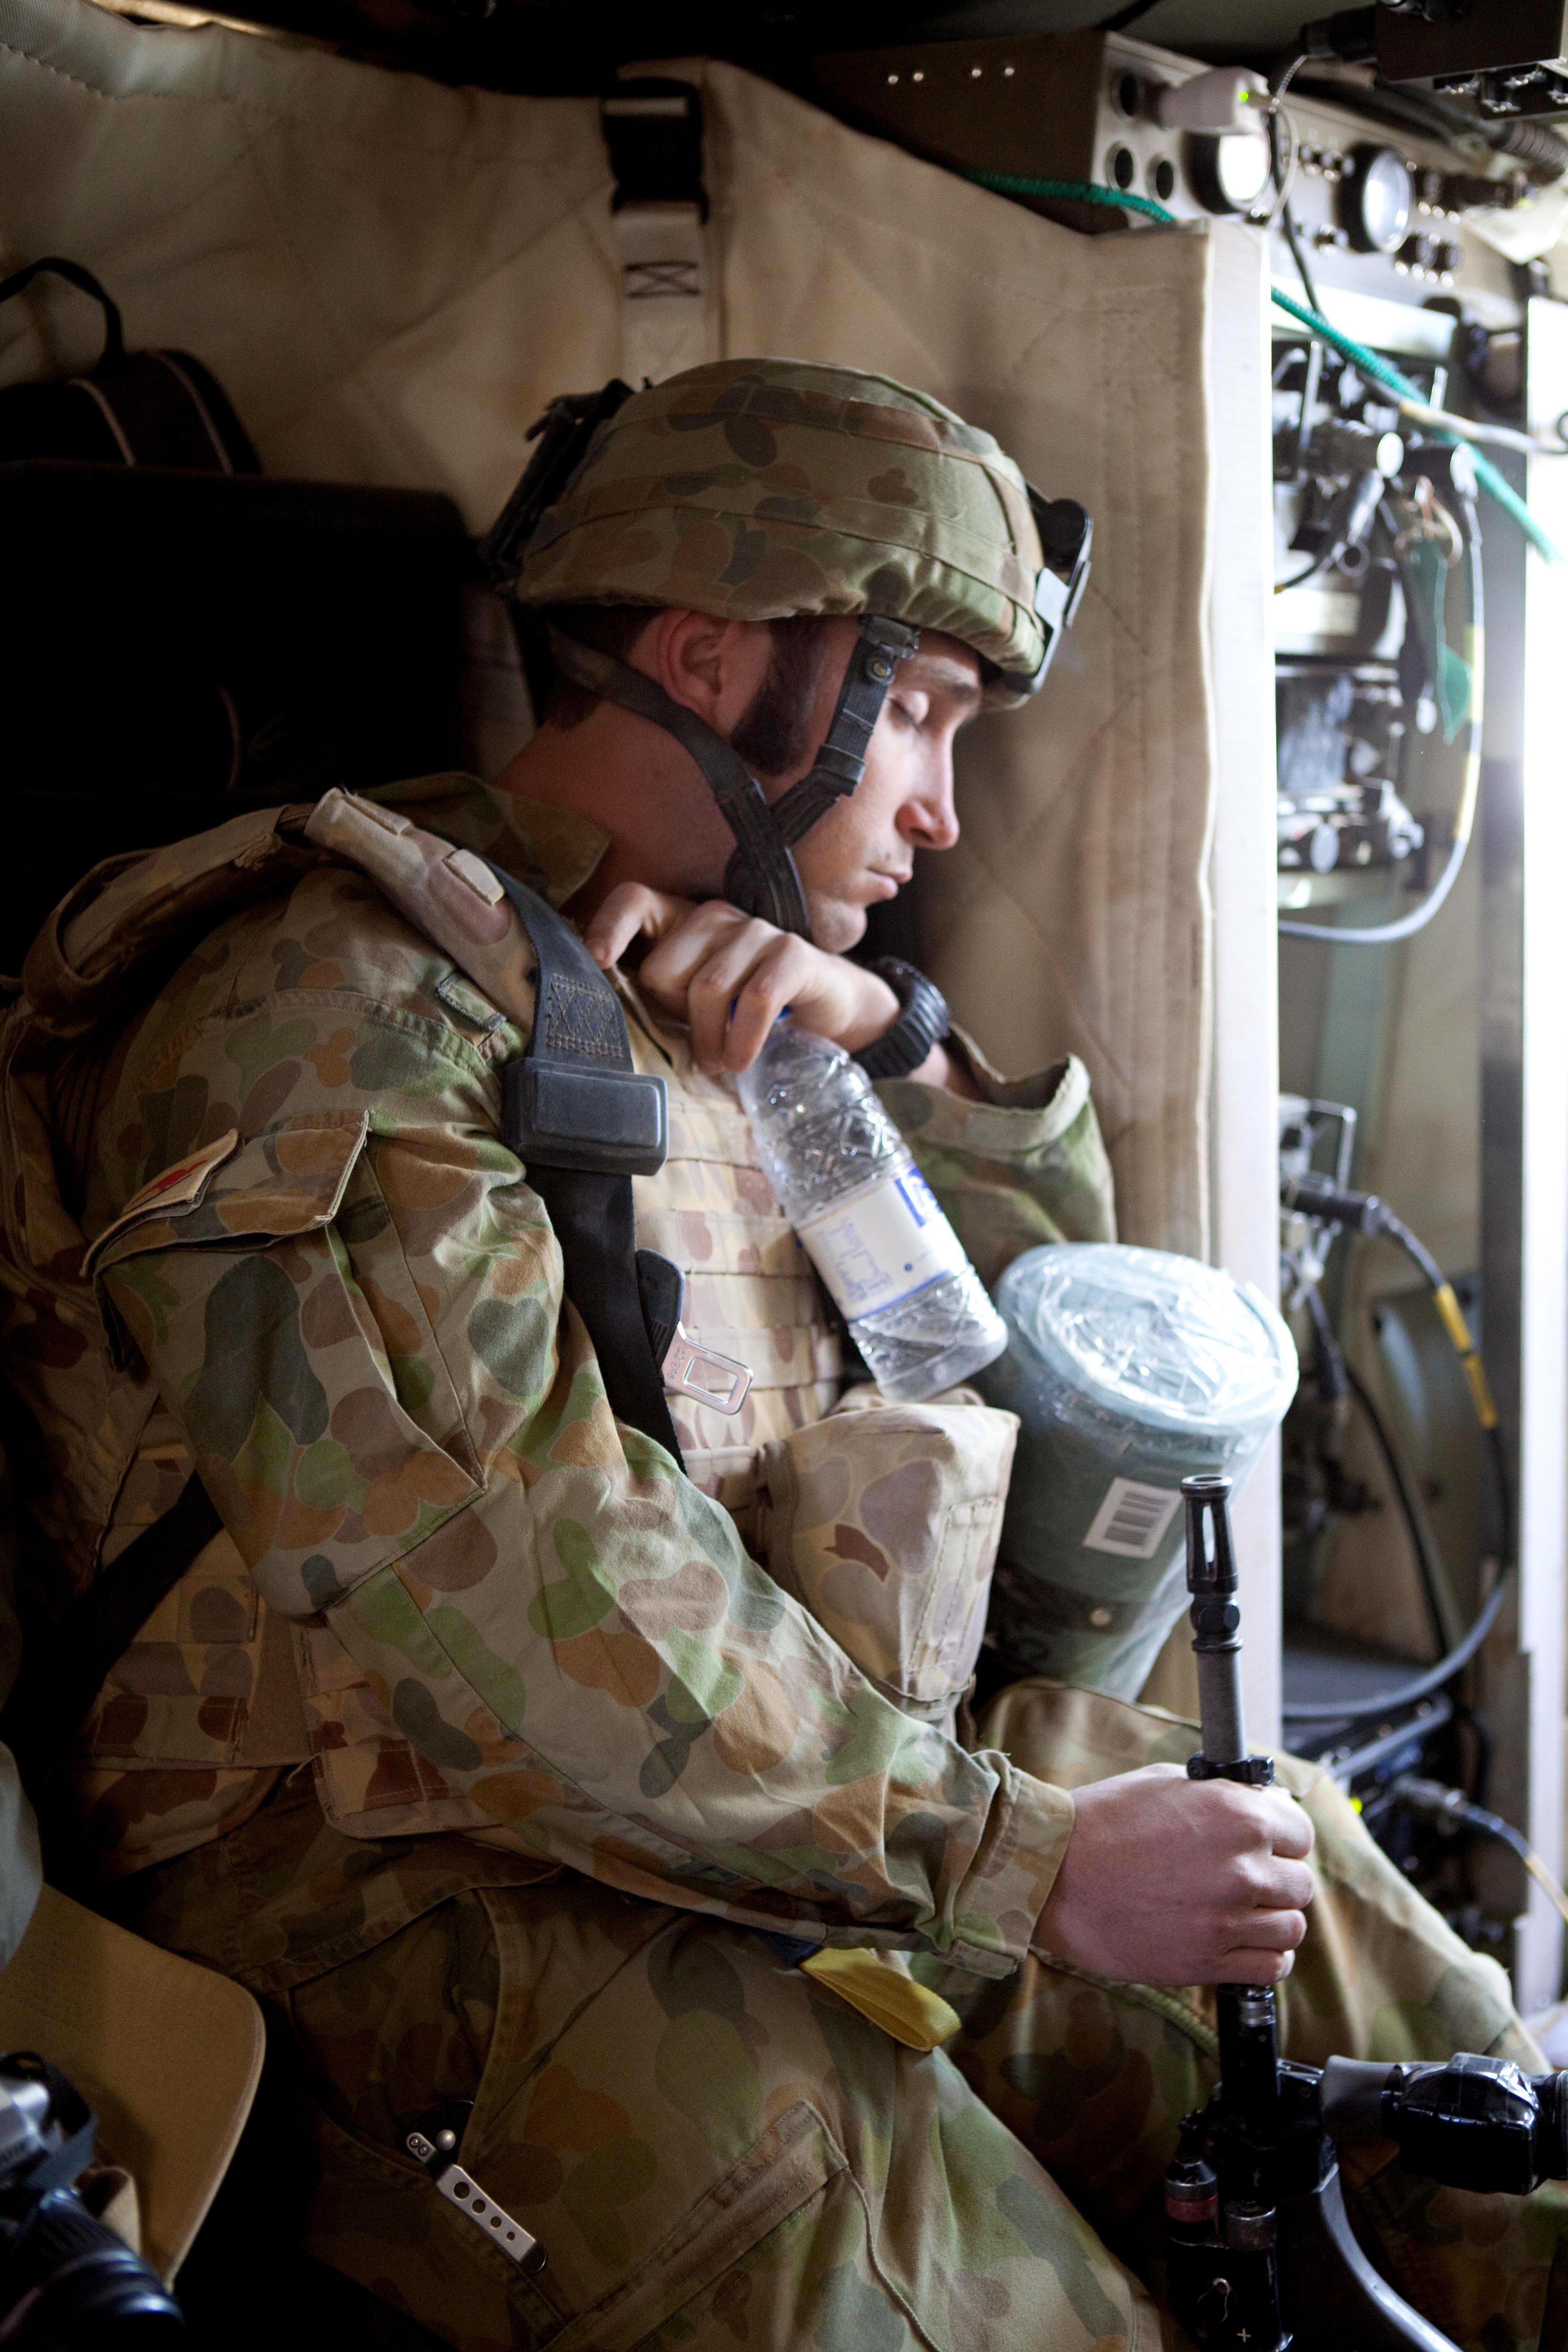 A photograph of an Australian soldier wearing army greens and a helmet while sleeping.